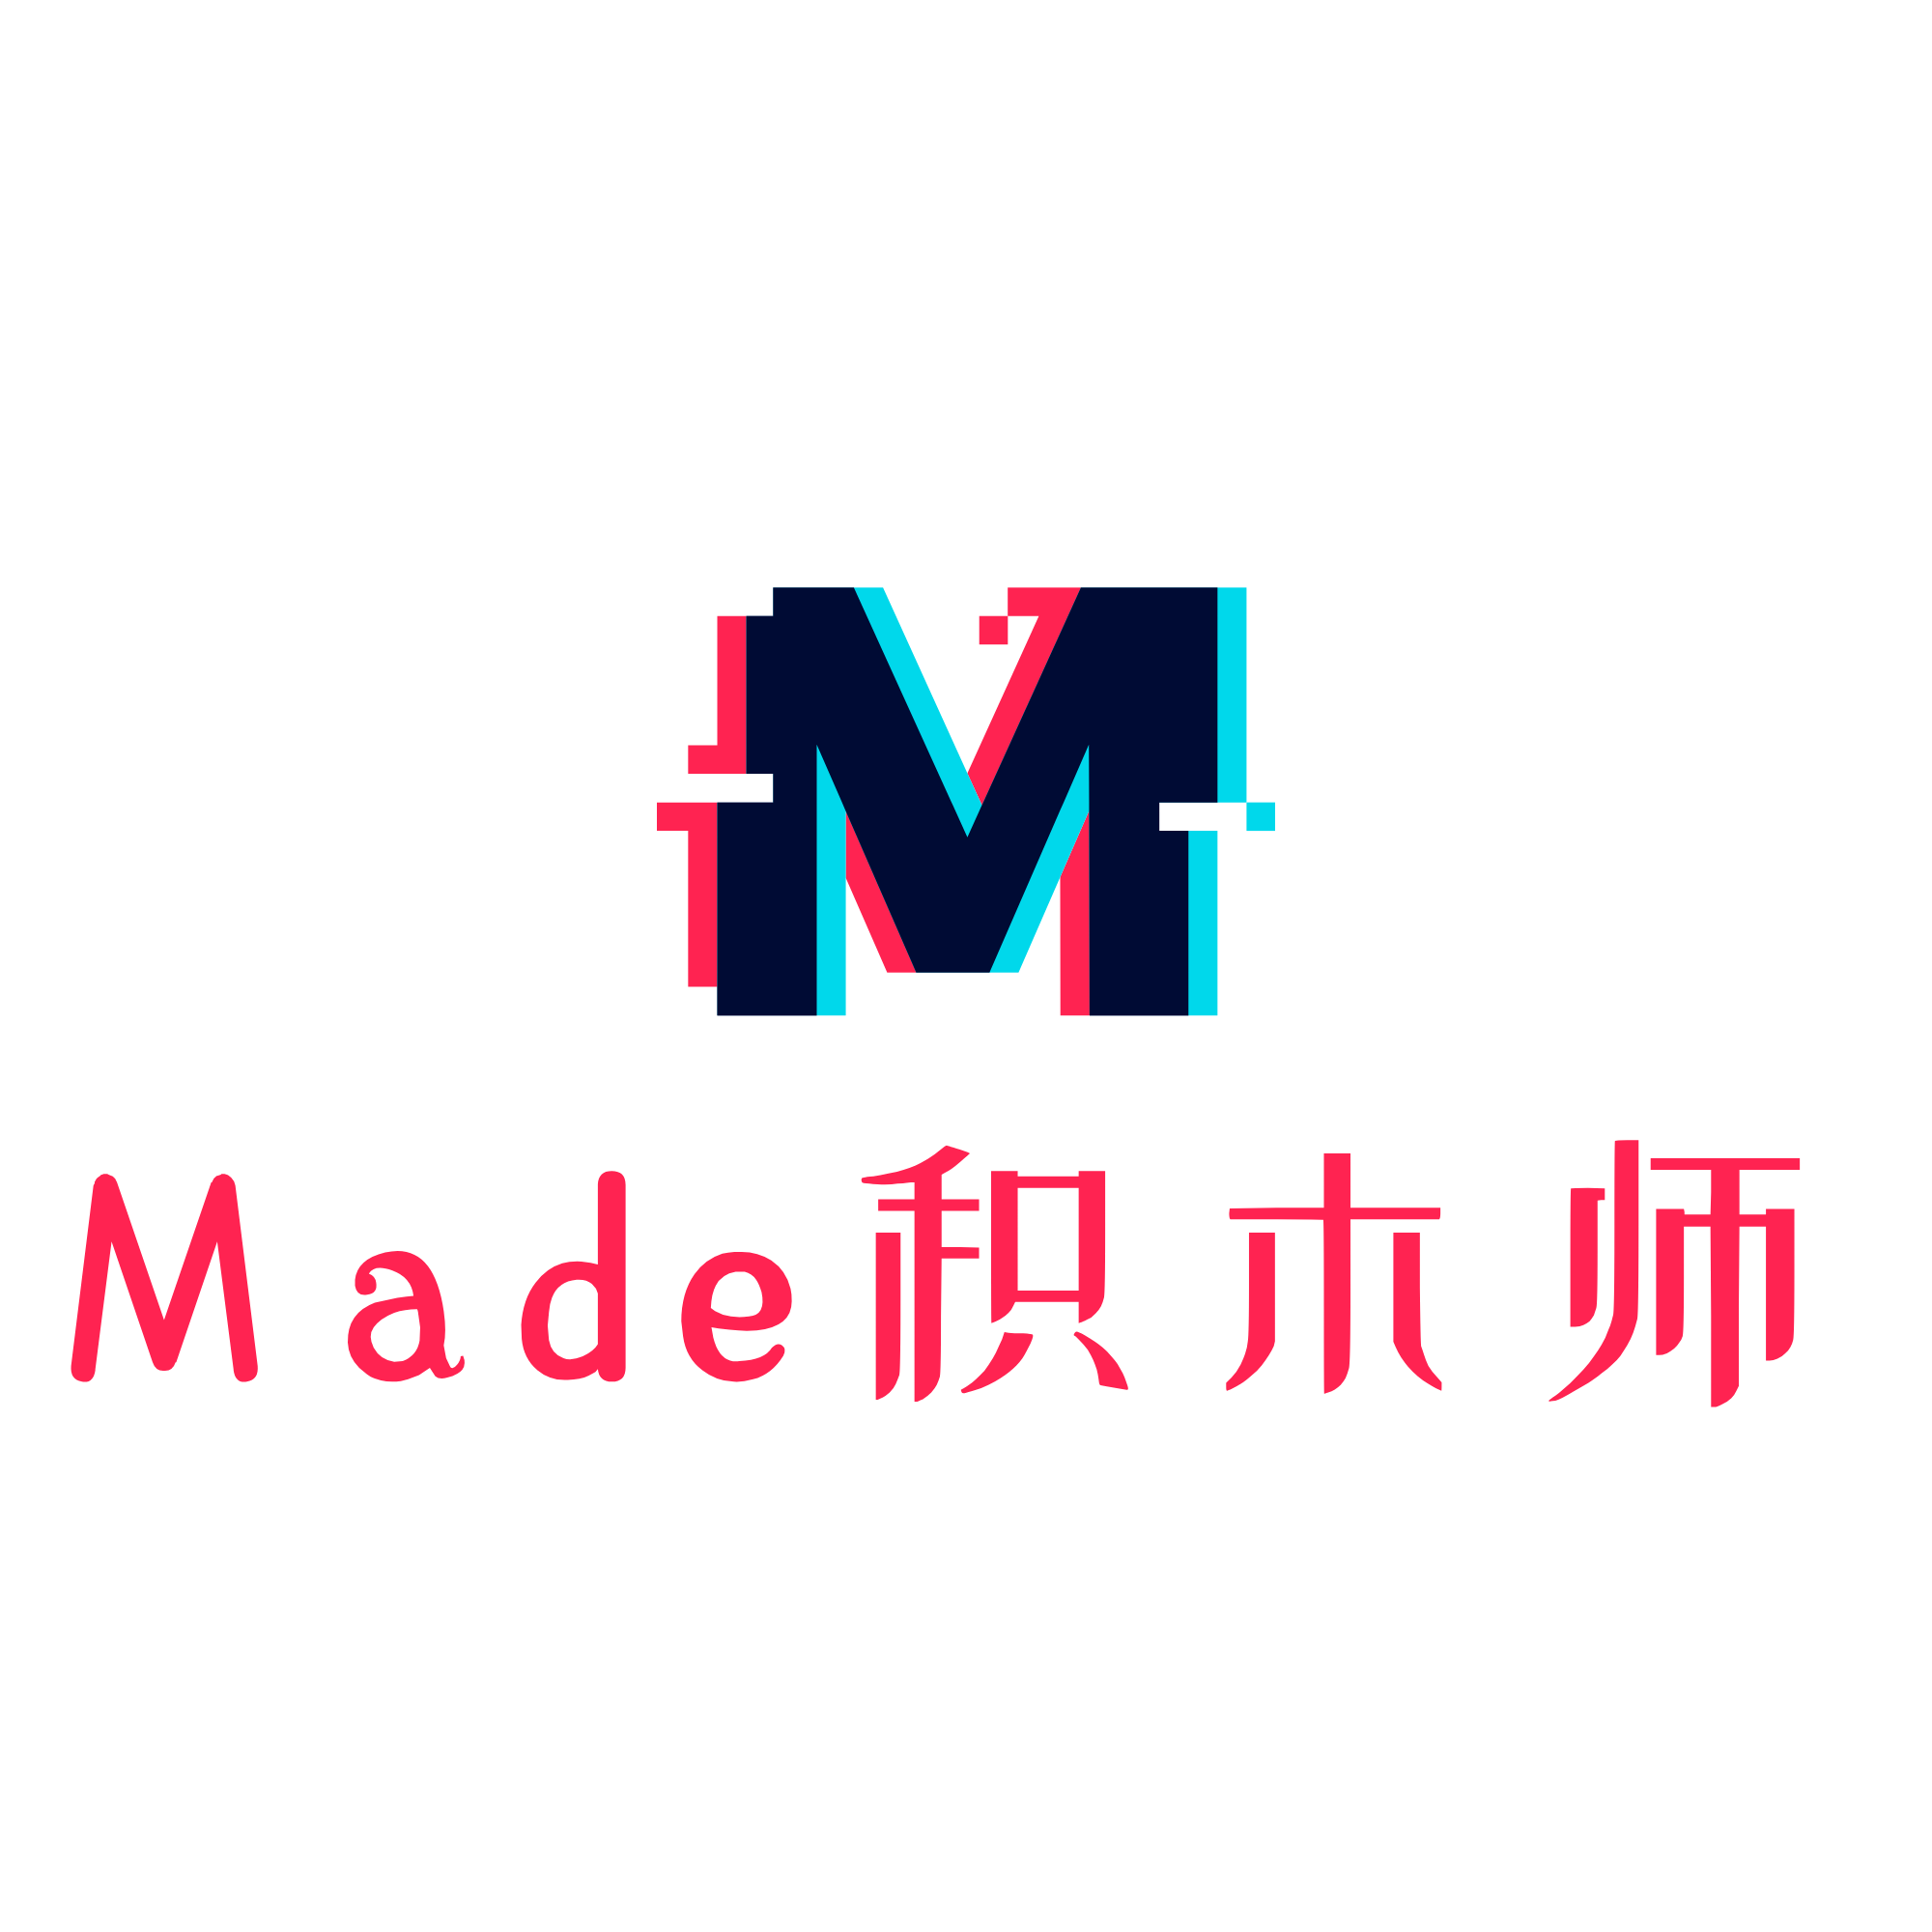 Made积木师